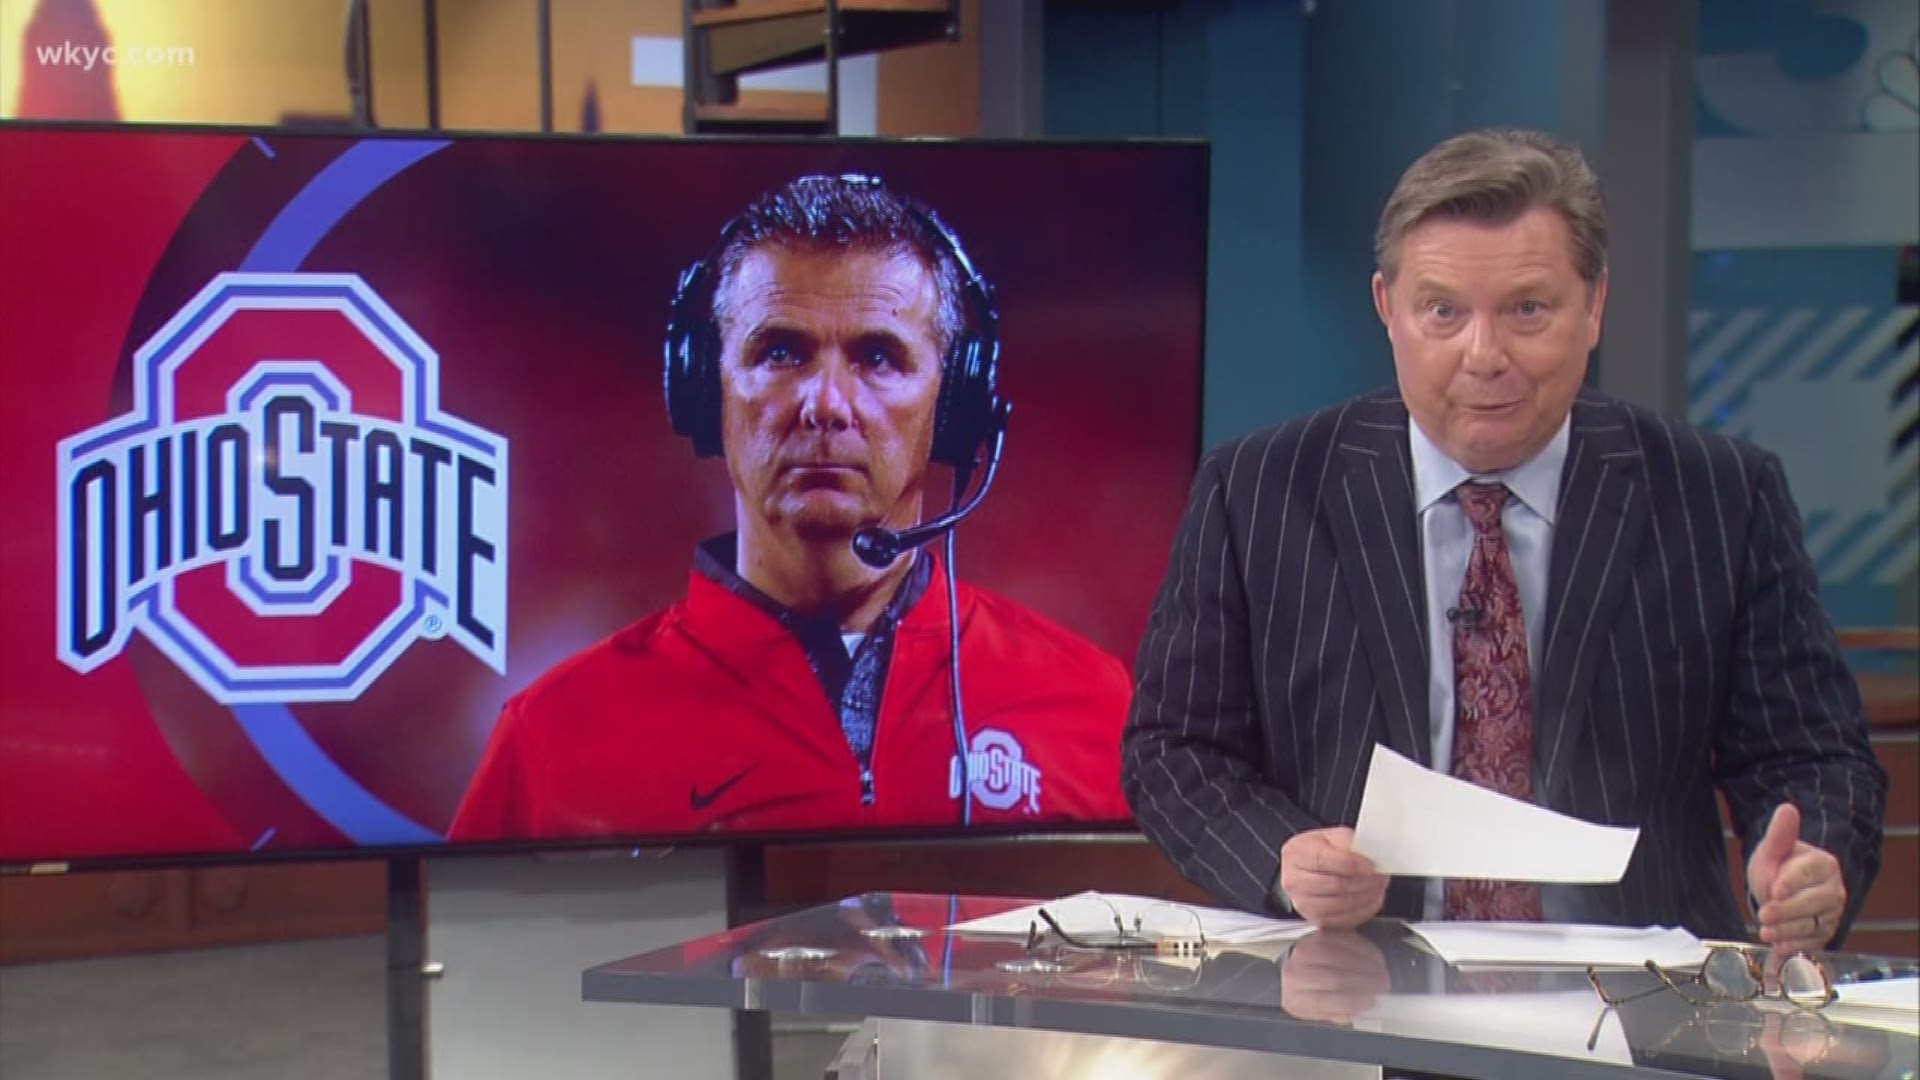 REPORT | Former Ohio State coach Urban Meyer close to joining Fox Sports as college football analyst